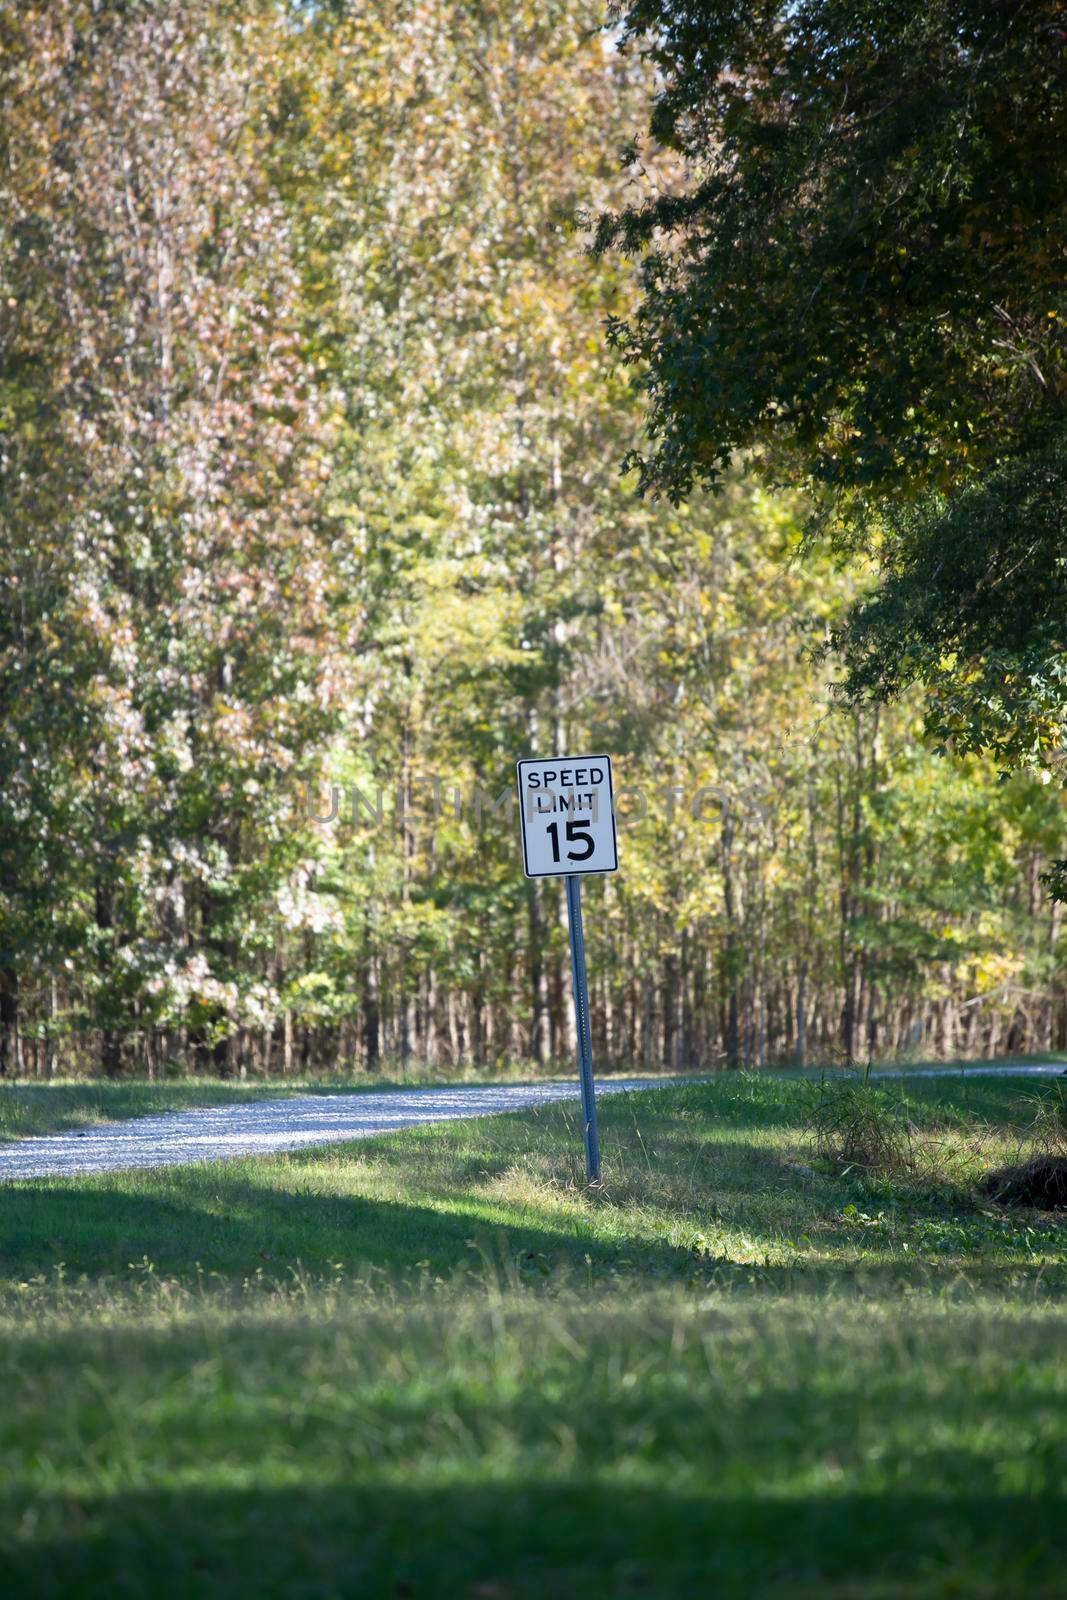 Fifteen mile per hour speed limit sign on a rural gravel road